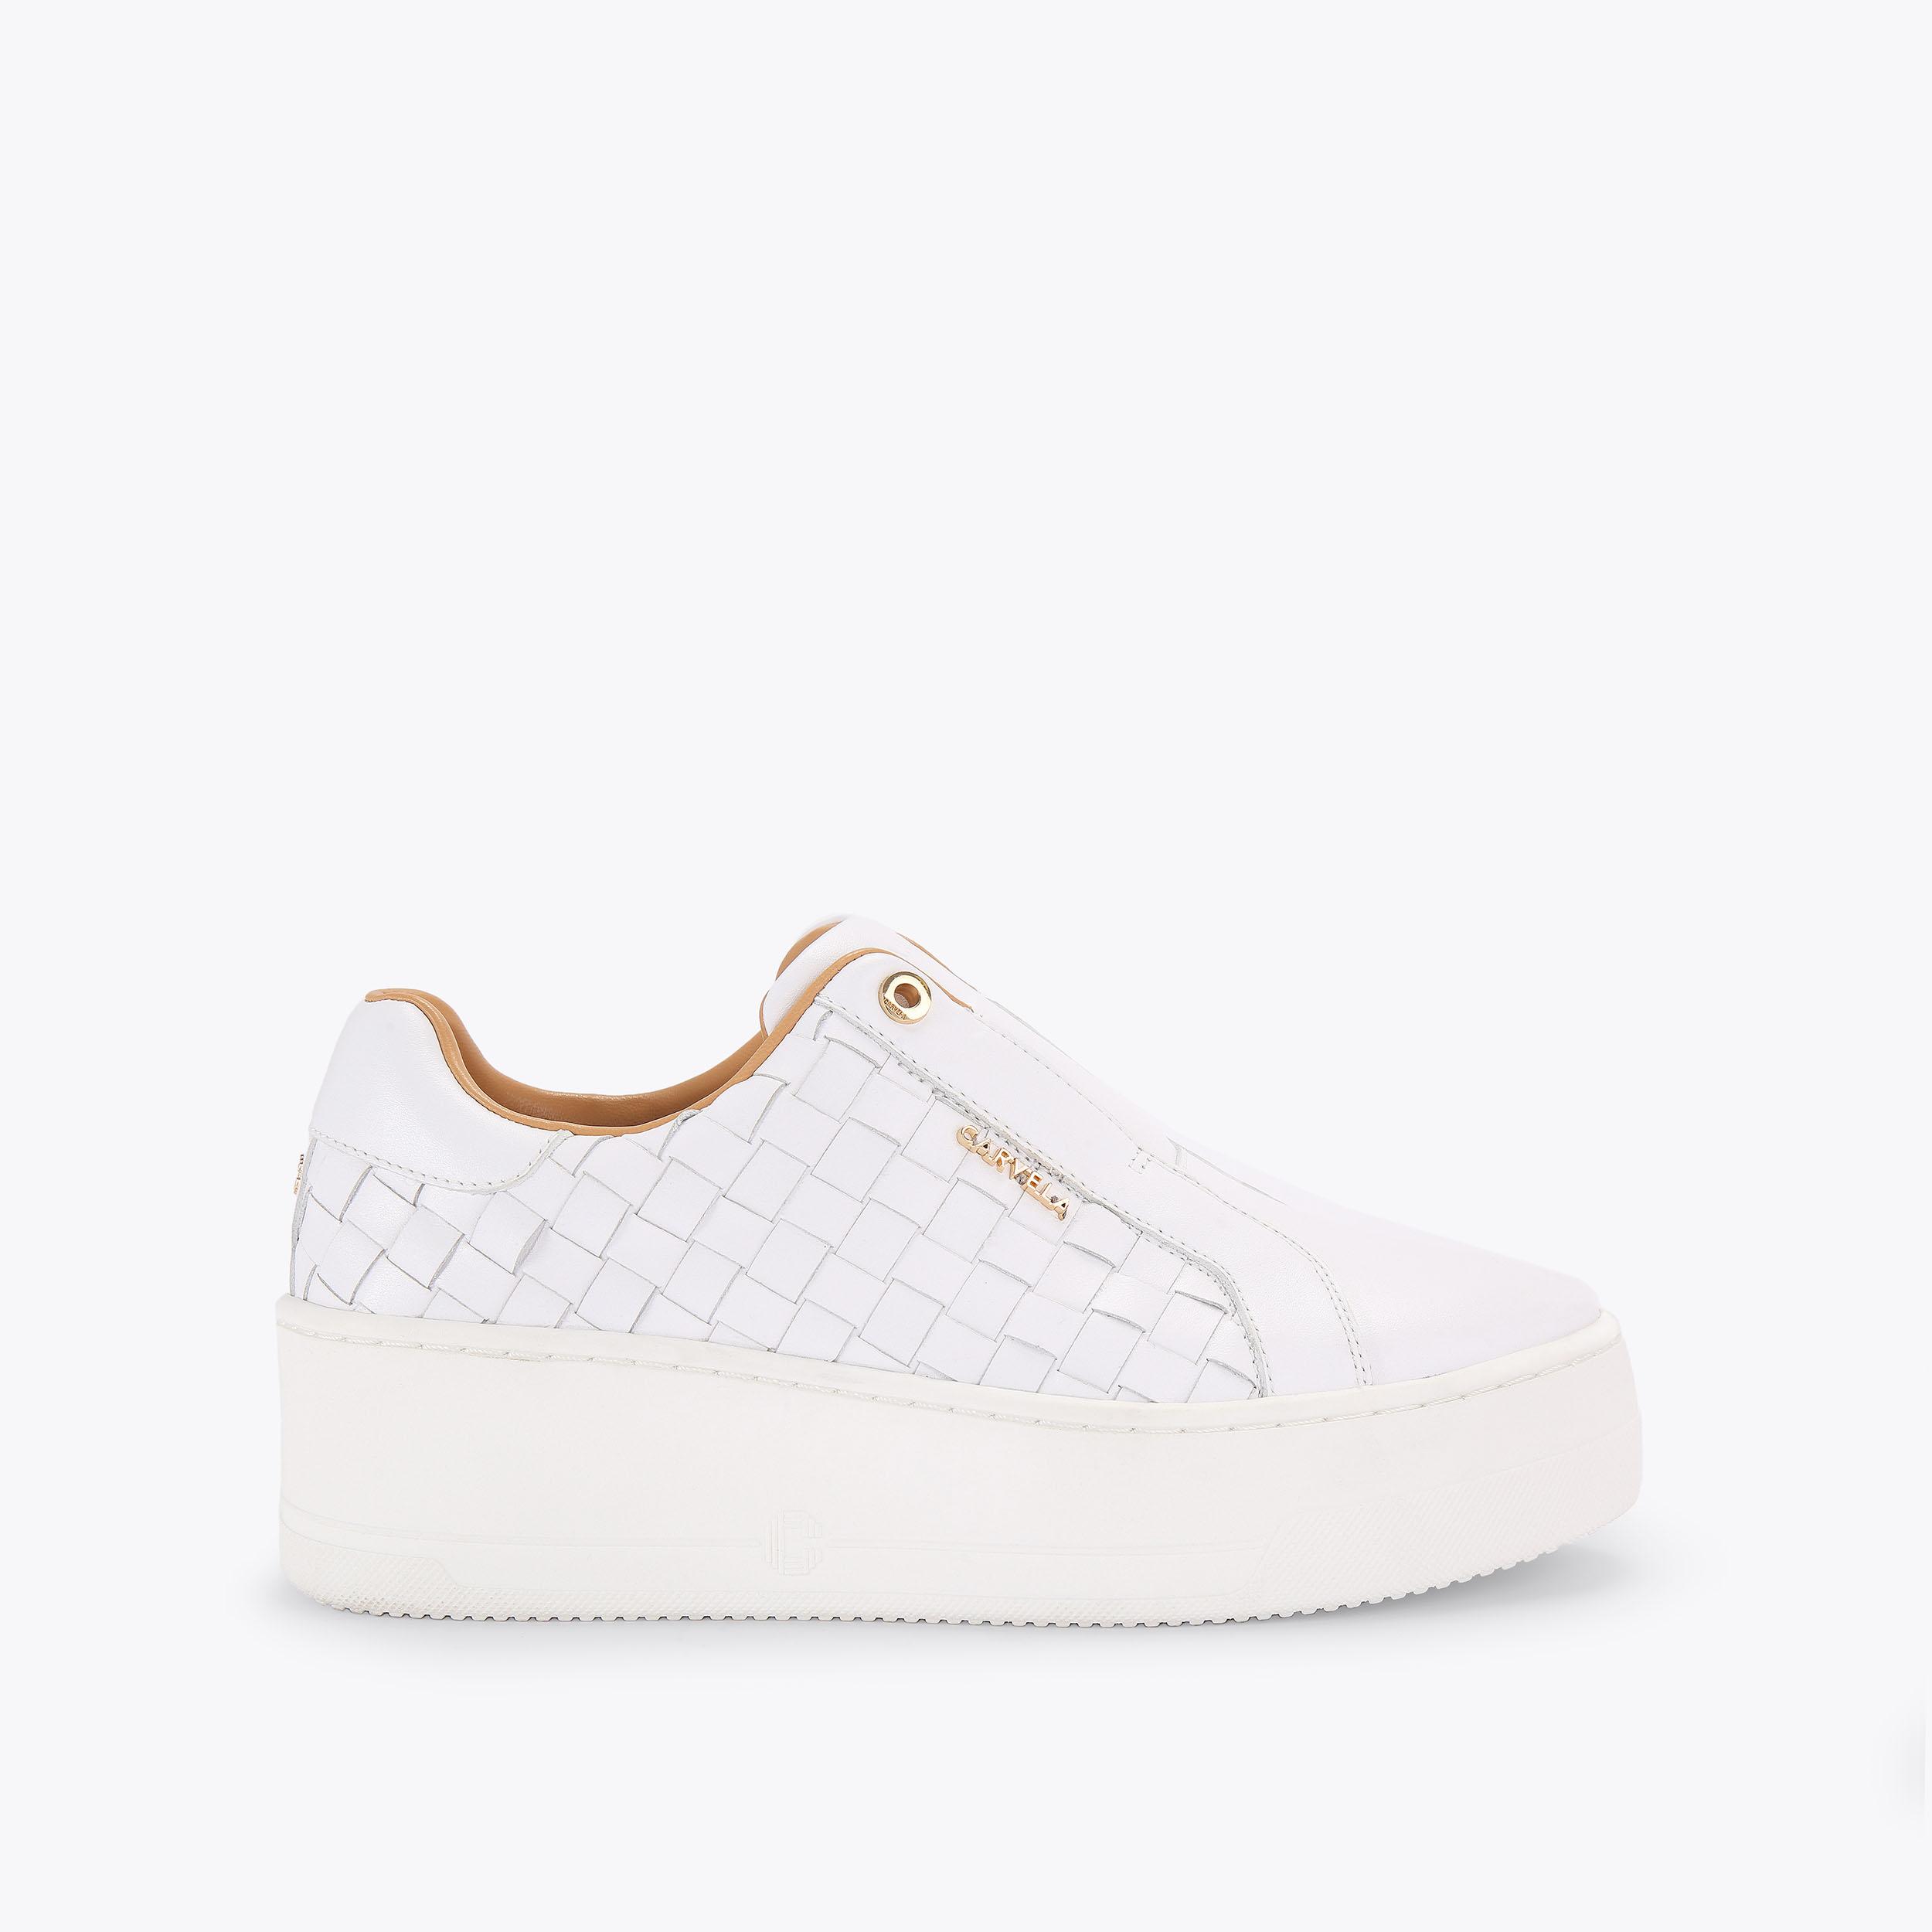 CONNECTED LACELESS WEAVE White Woven Trainers by CARVELA